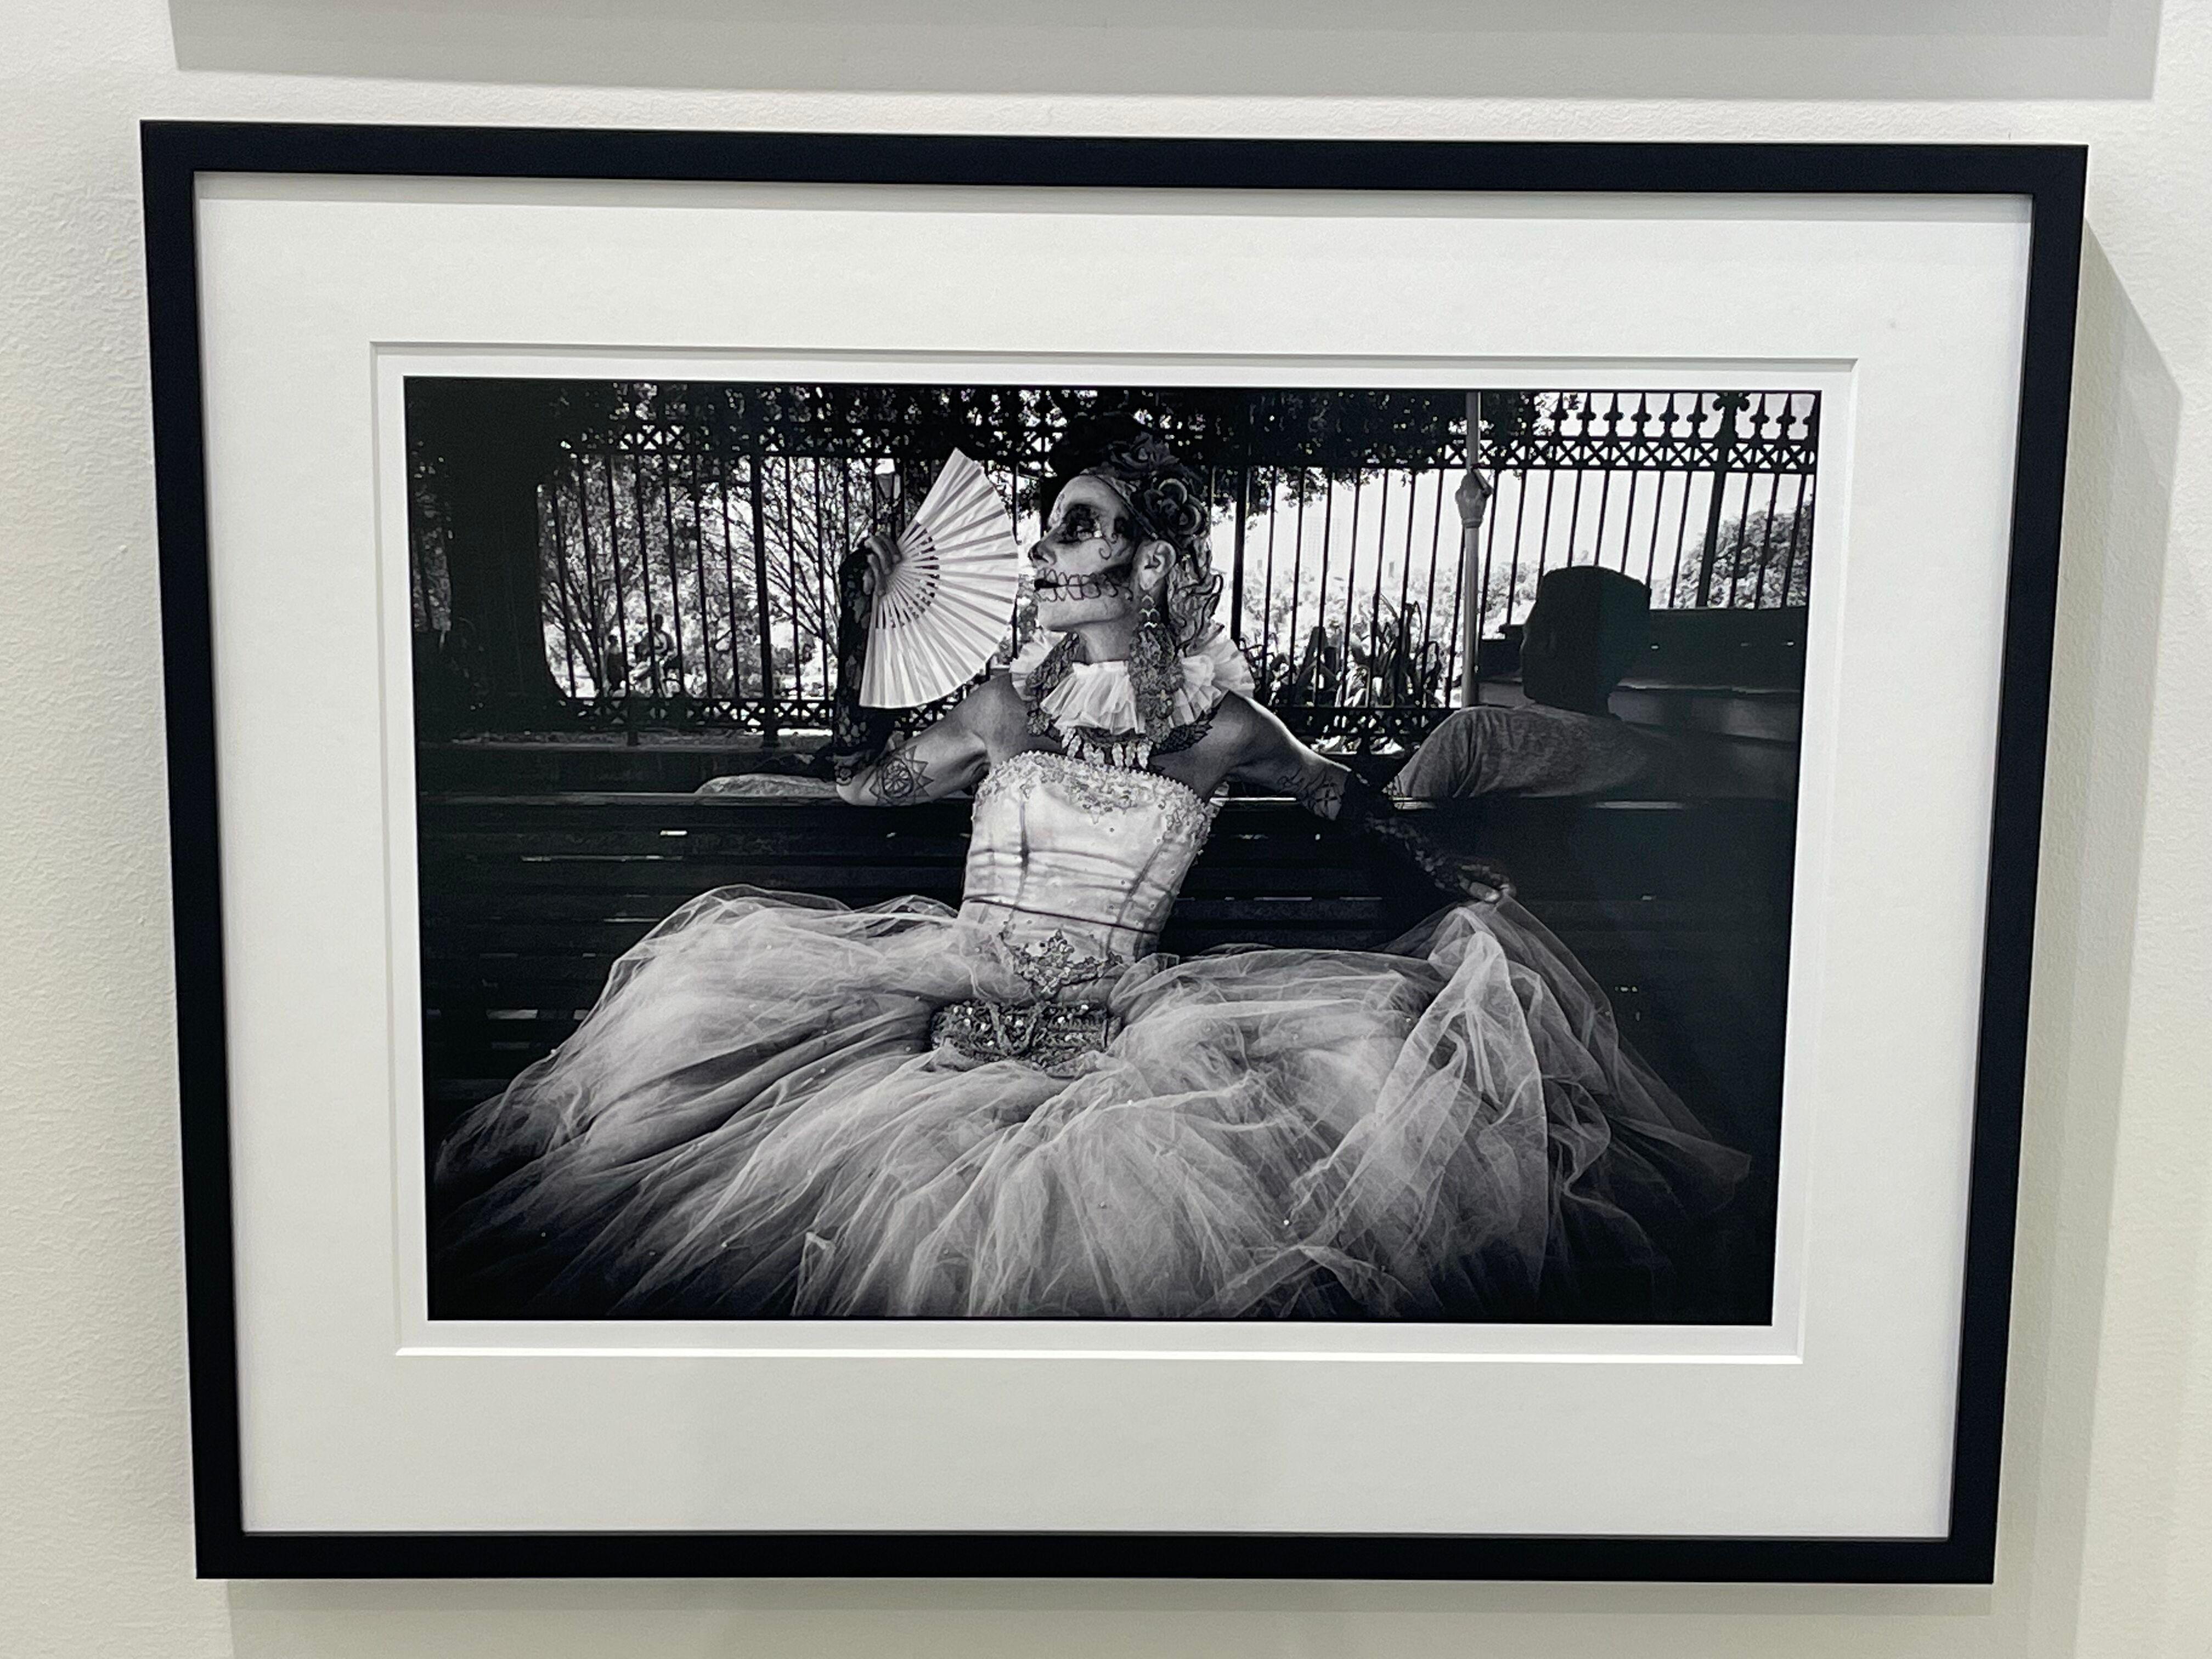 Queen of Jackson Square (1/10) - Photograph by James Hayman